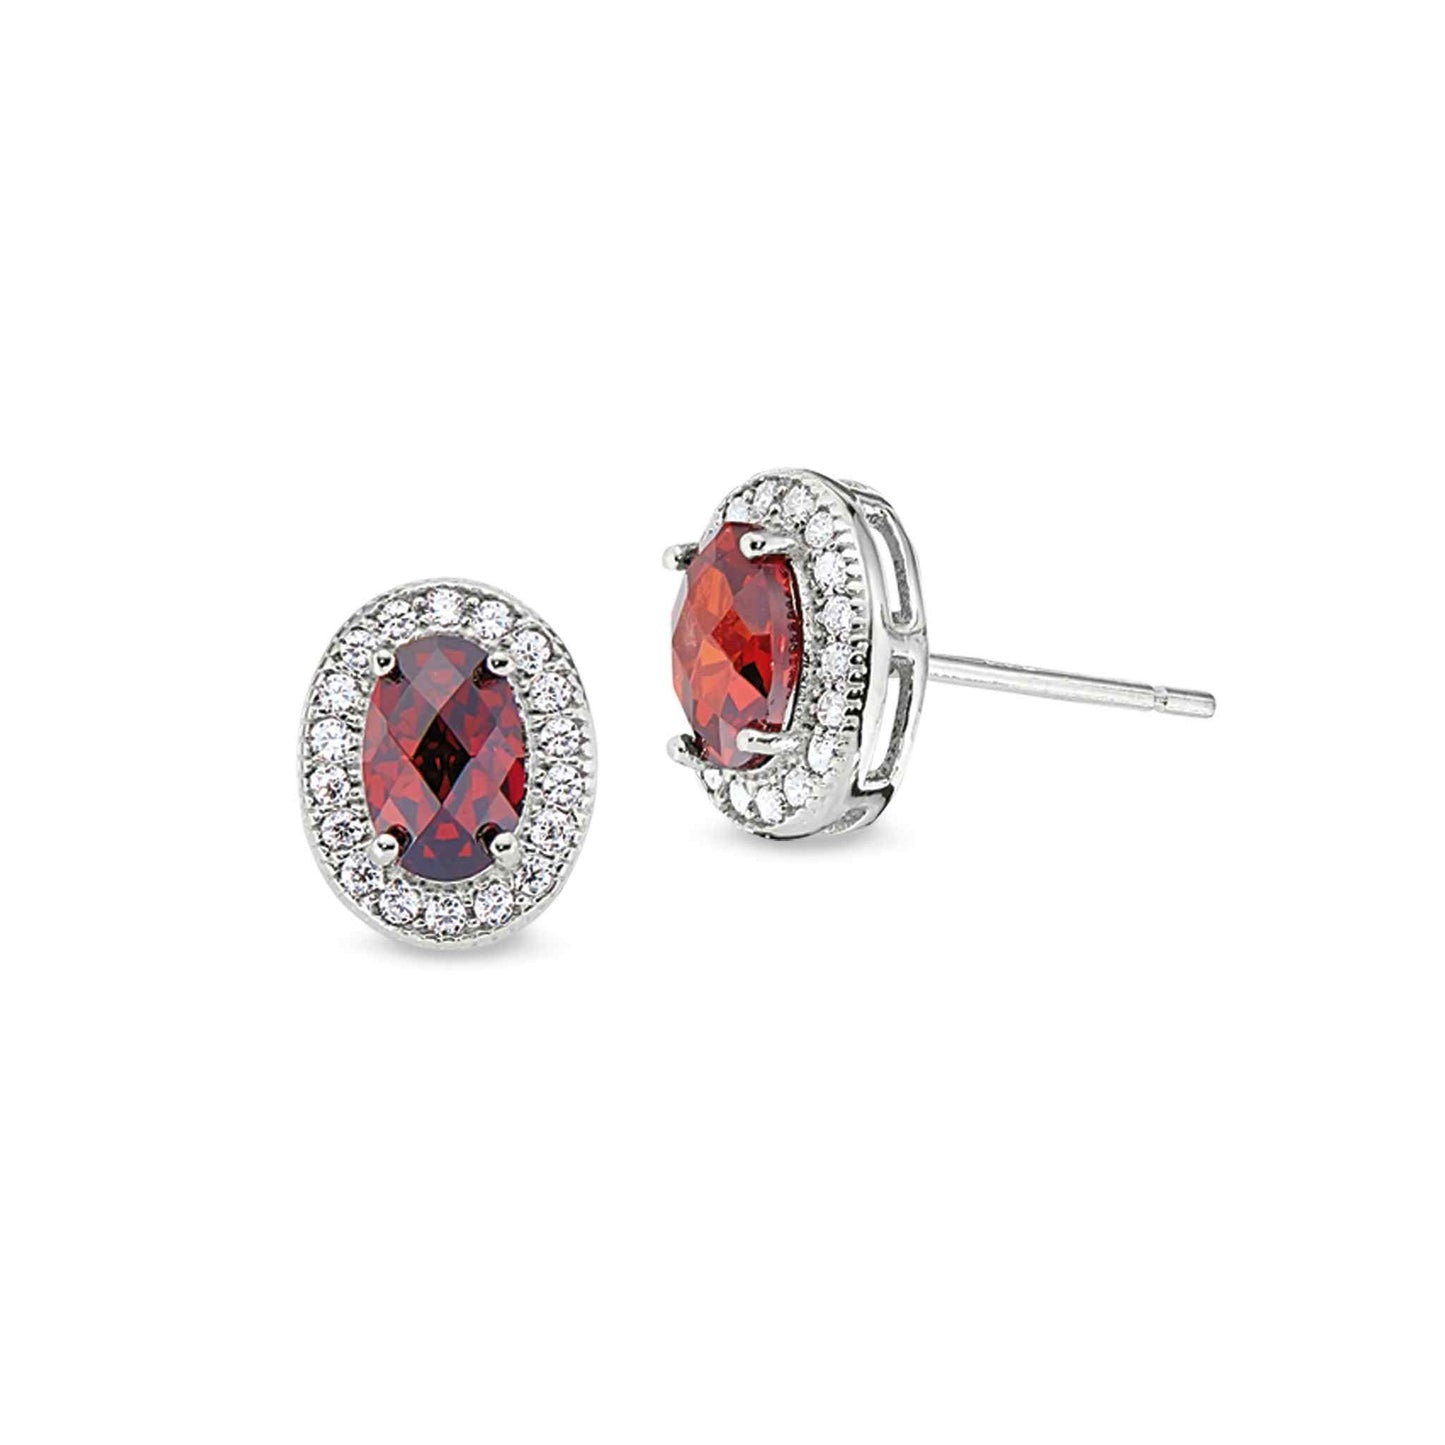 A facet cut garnet colored earrings with simulated diamonds displayed on a neutral white background.